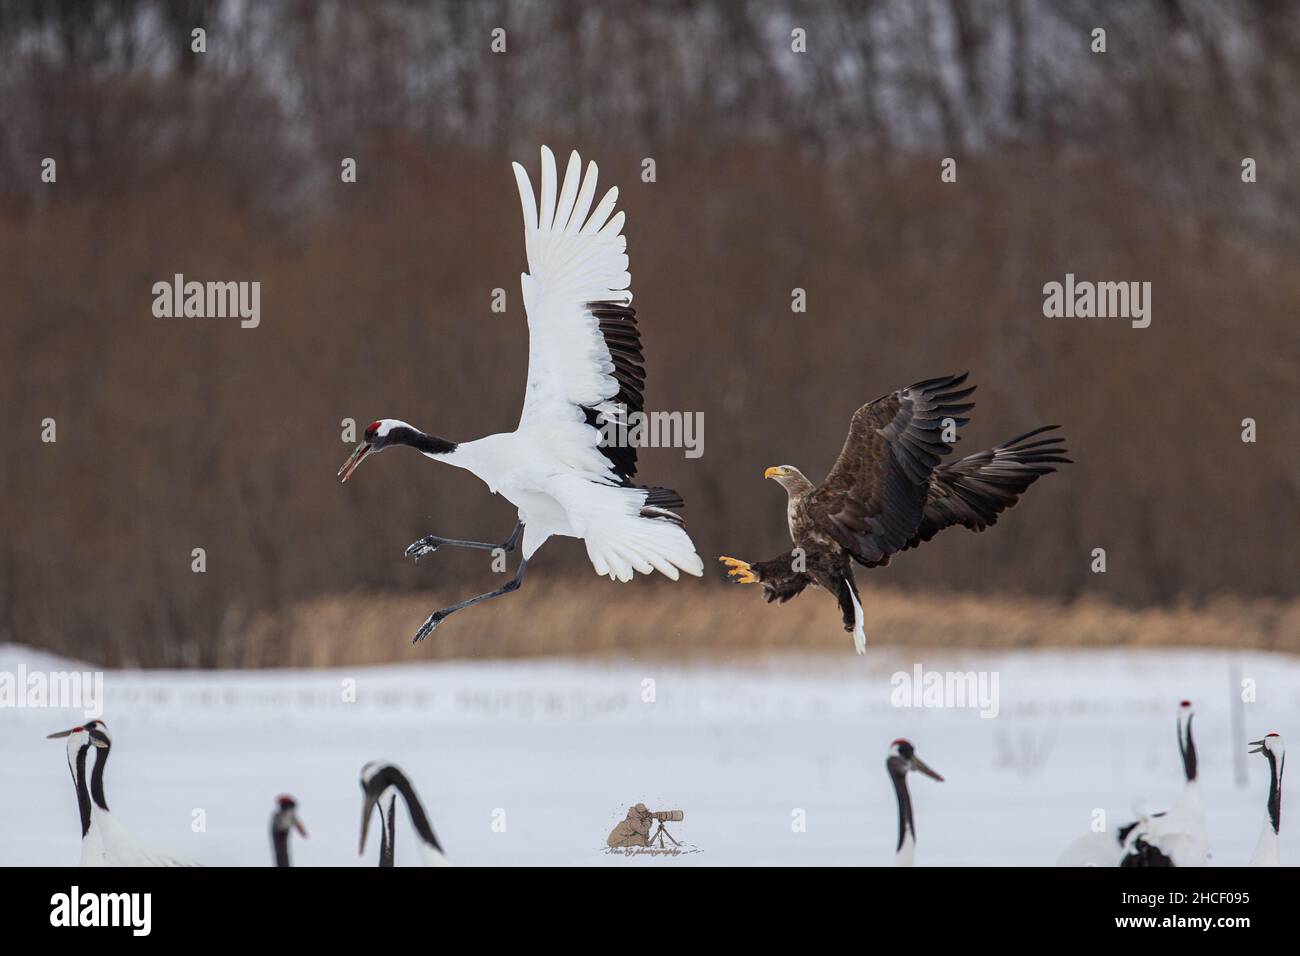 Crane and a hawk flying close to each other Stock Photo